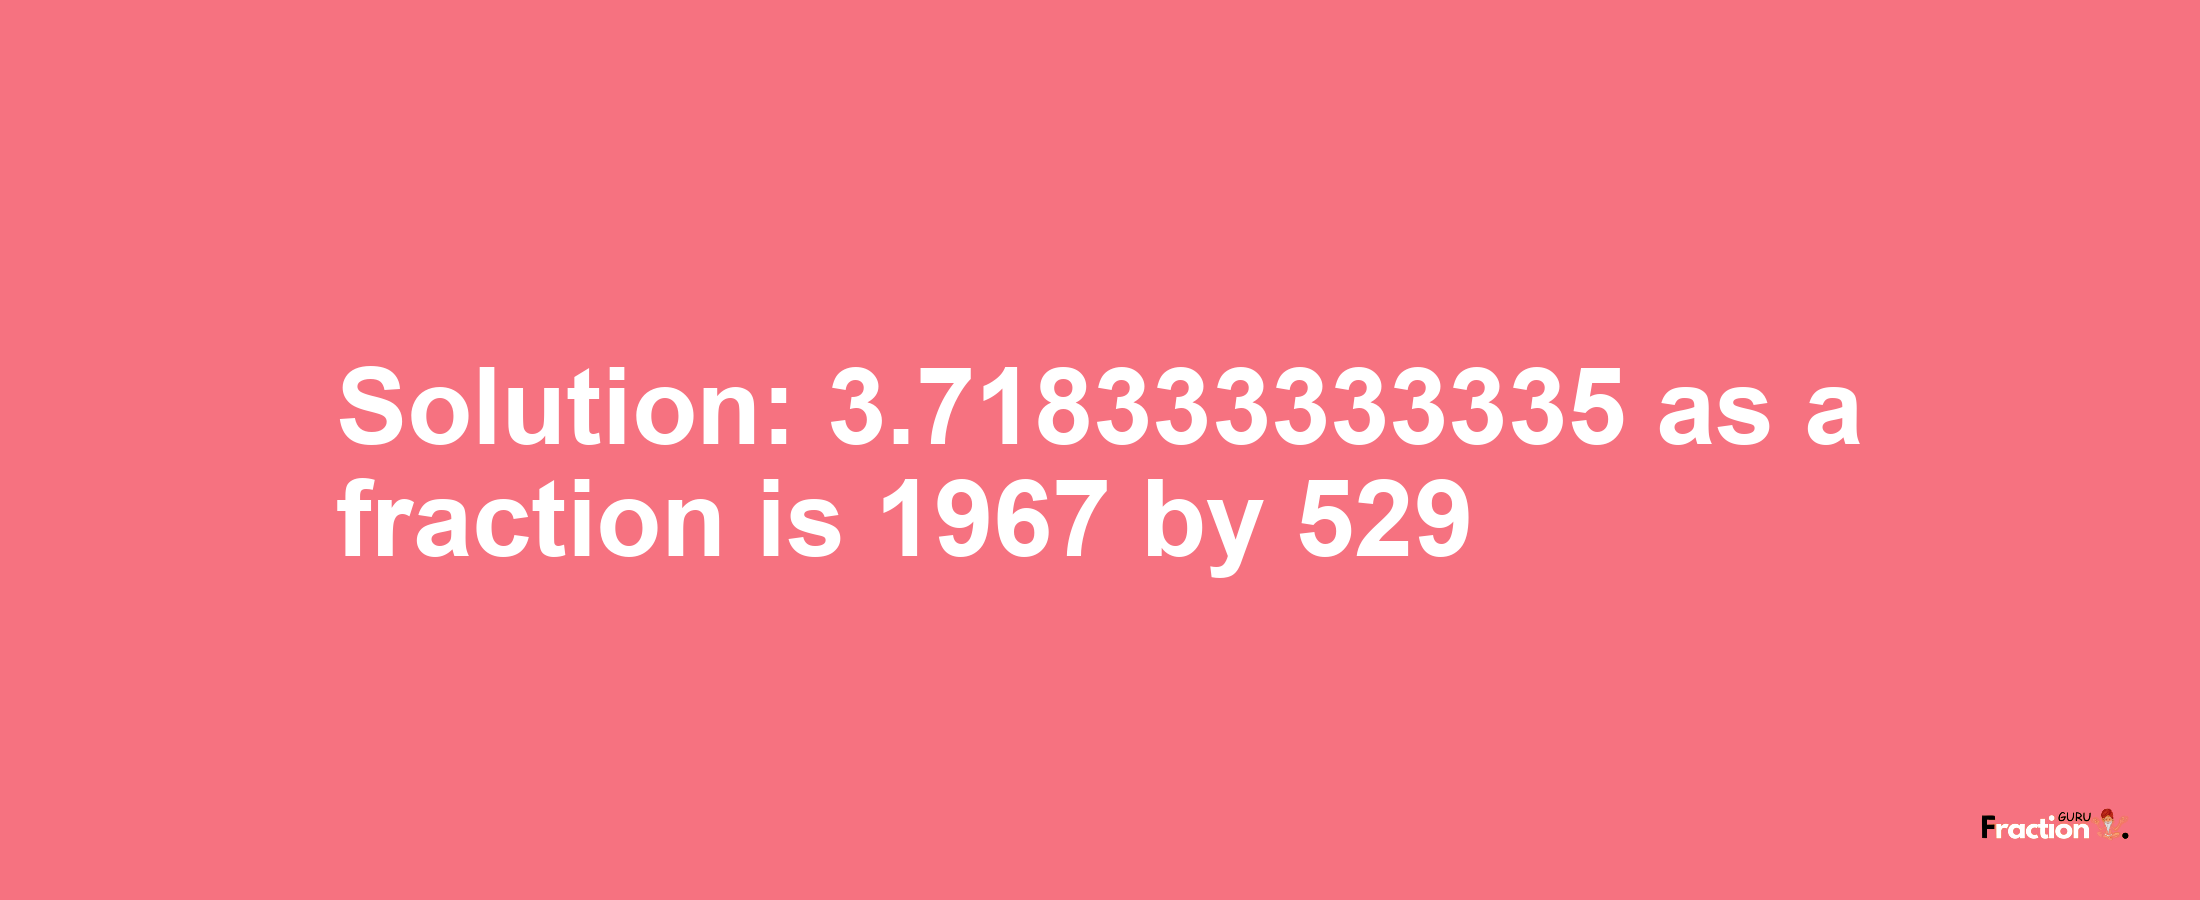 Solution:3.718333333335 as a fraction is 1967/529